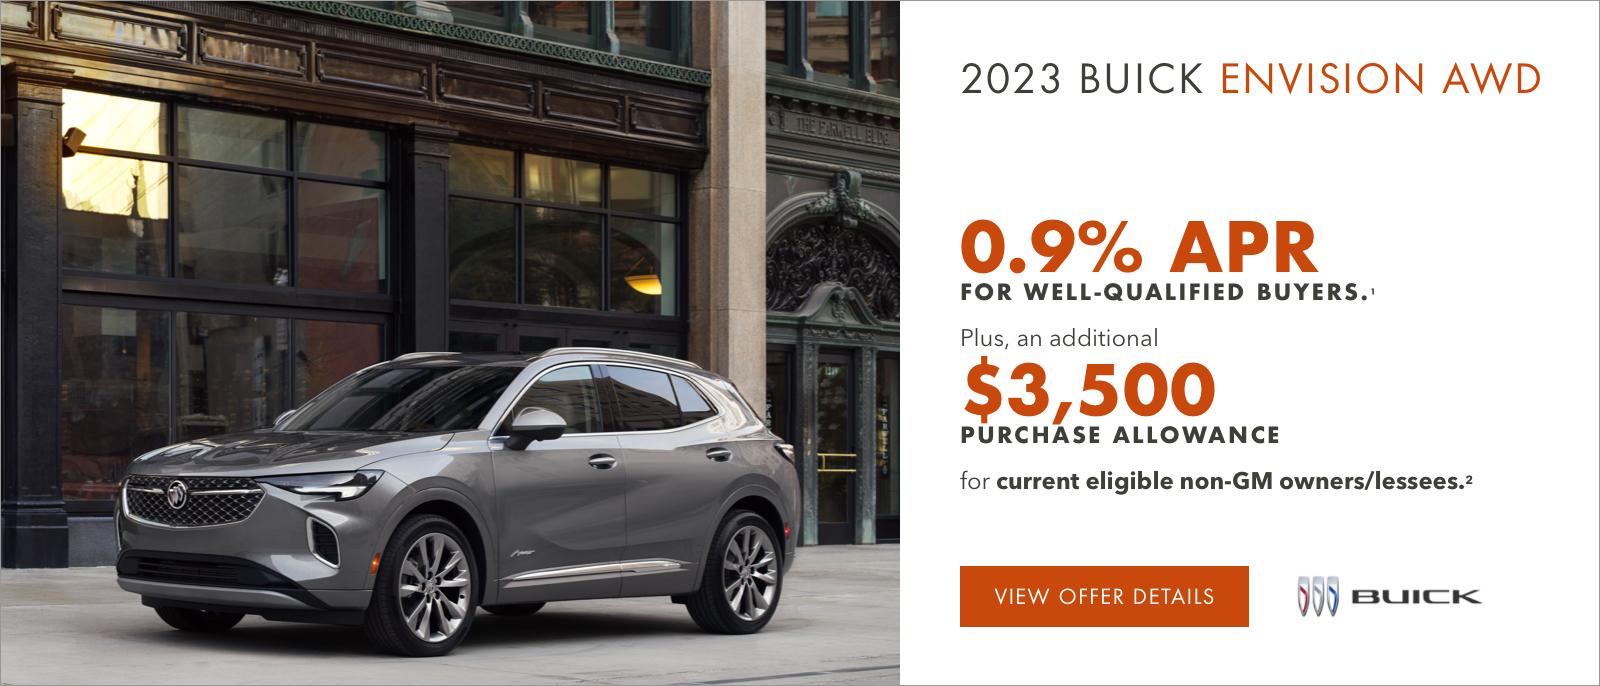 2023 Buick ENVISION AWD

0.9% APR 
FOR WELL-QUALIFIED BUYERS.1

Plus, an additional $3,500 PURCHASE ALLOWANCE for current eligible non-GM owners/lessees.2